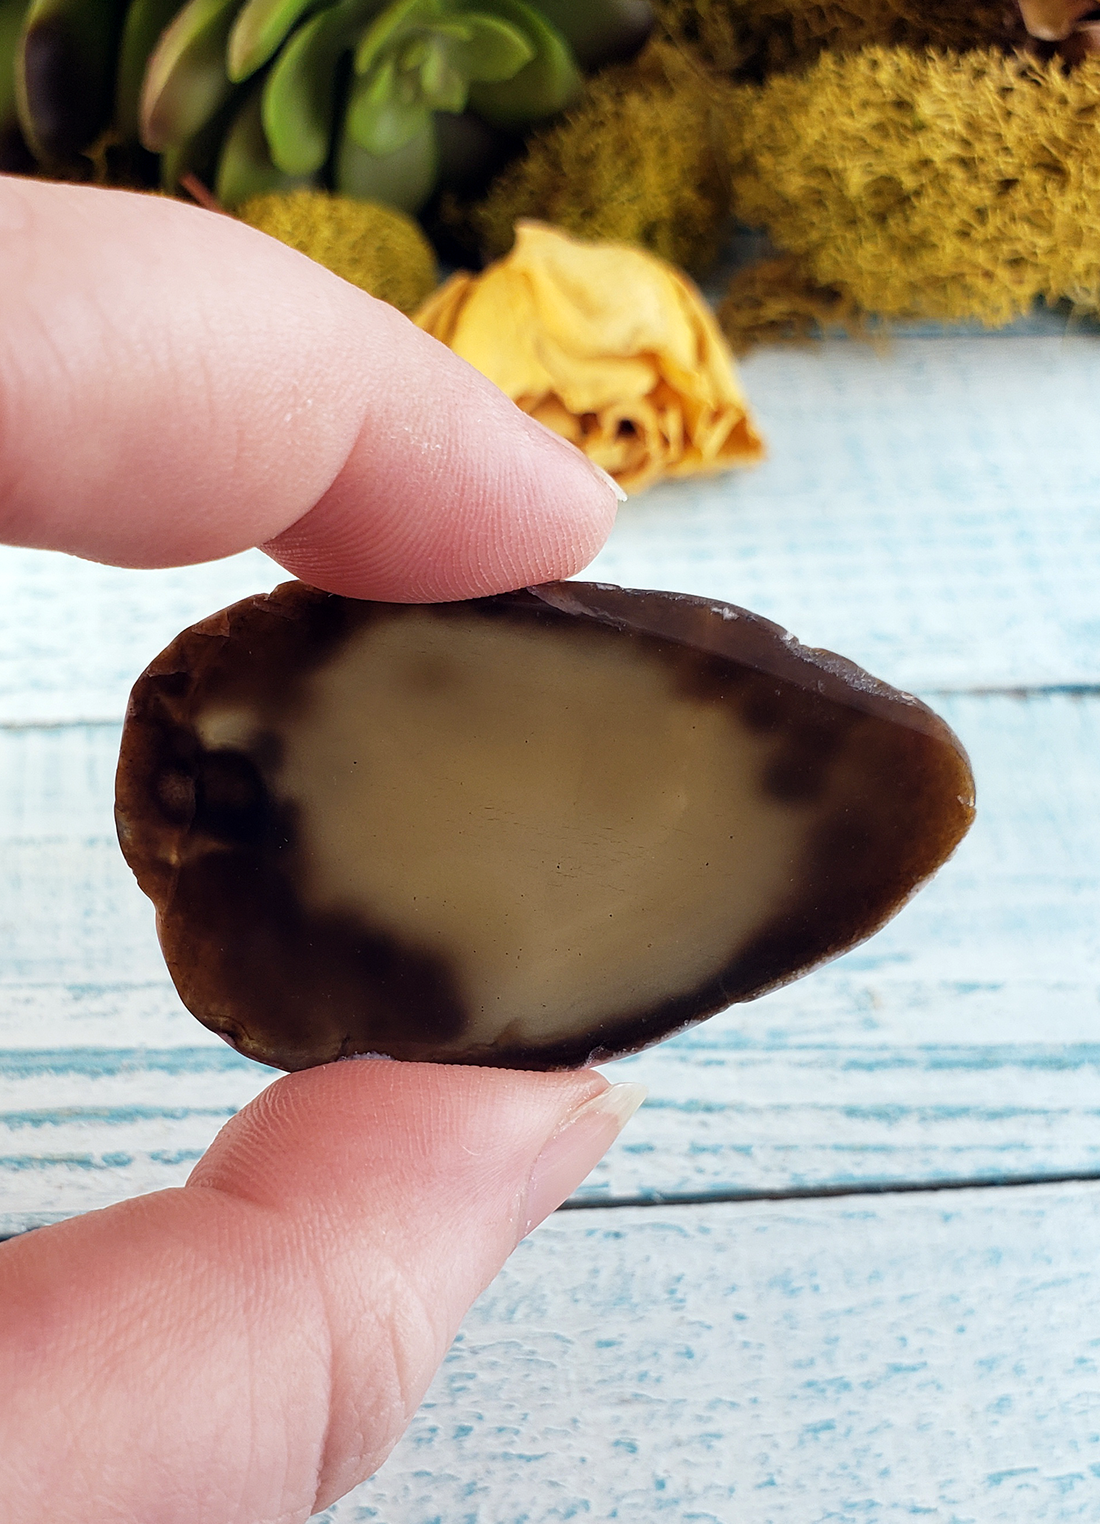 UNDRILLED Dyed Black Agate Gemstone Slice - Small